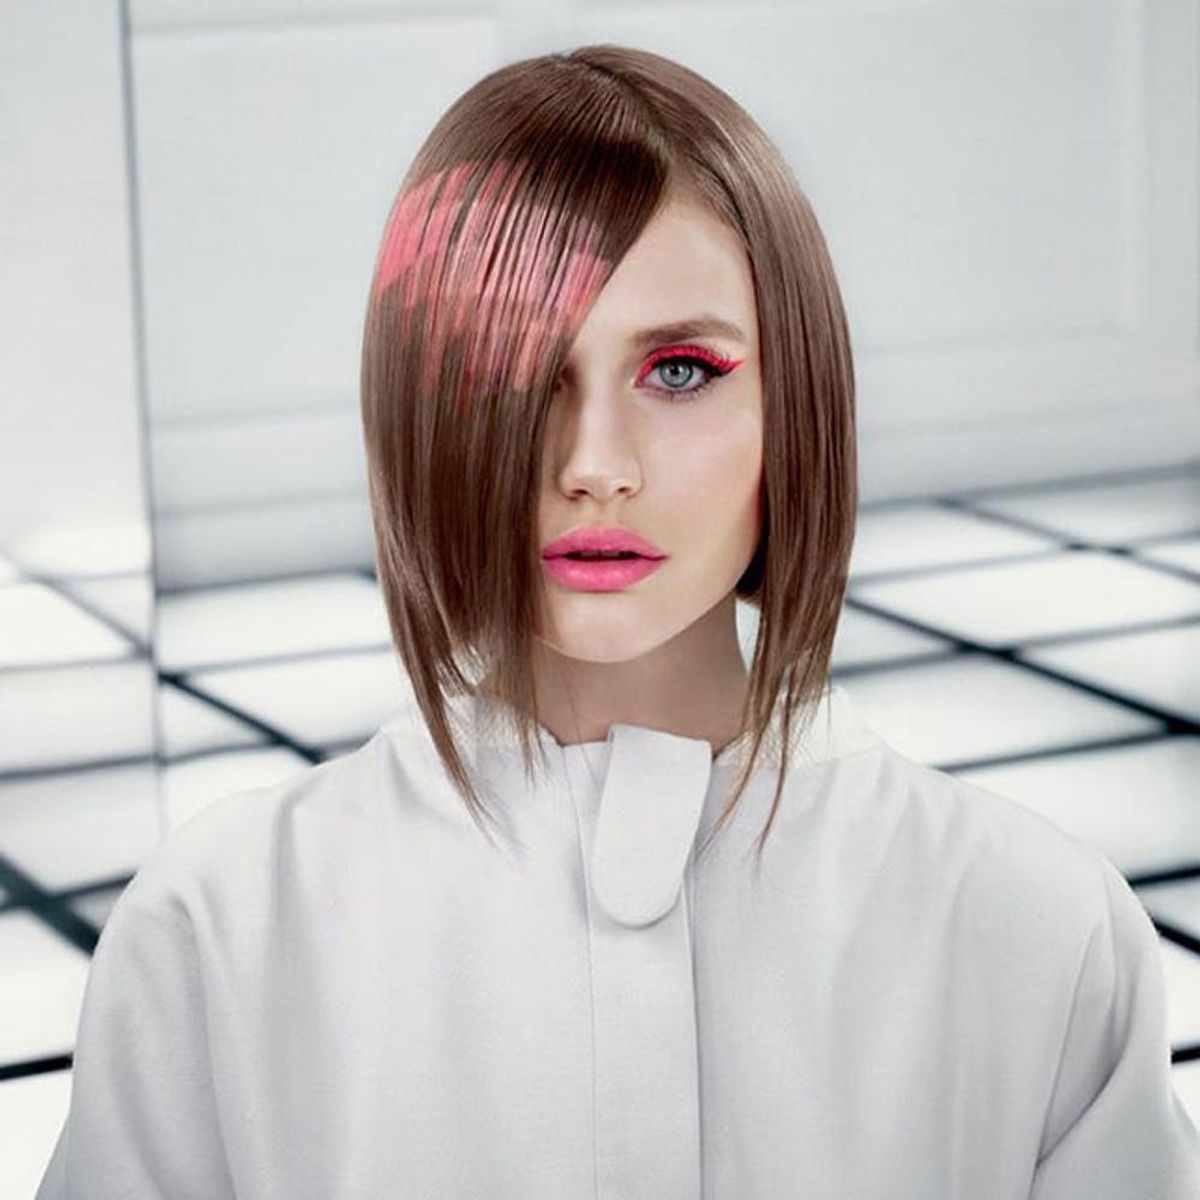 Pixelated Hair Is Now a Thing (and It’s Kind of Amazing)